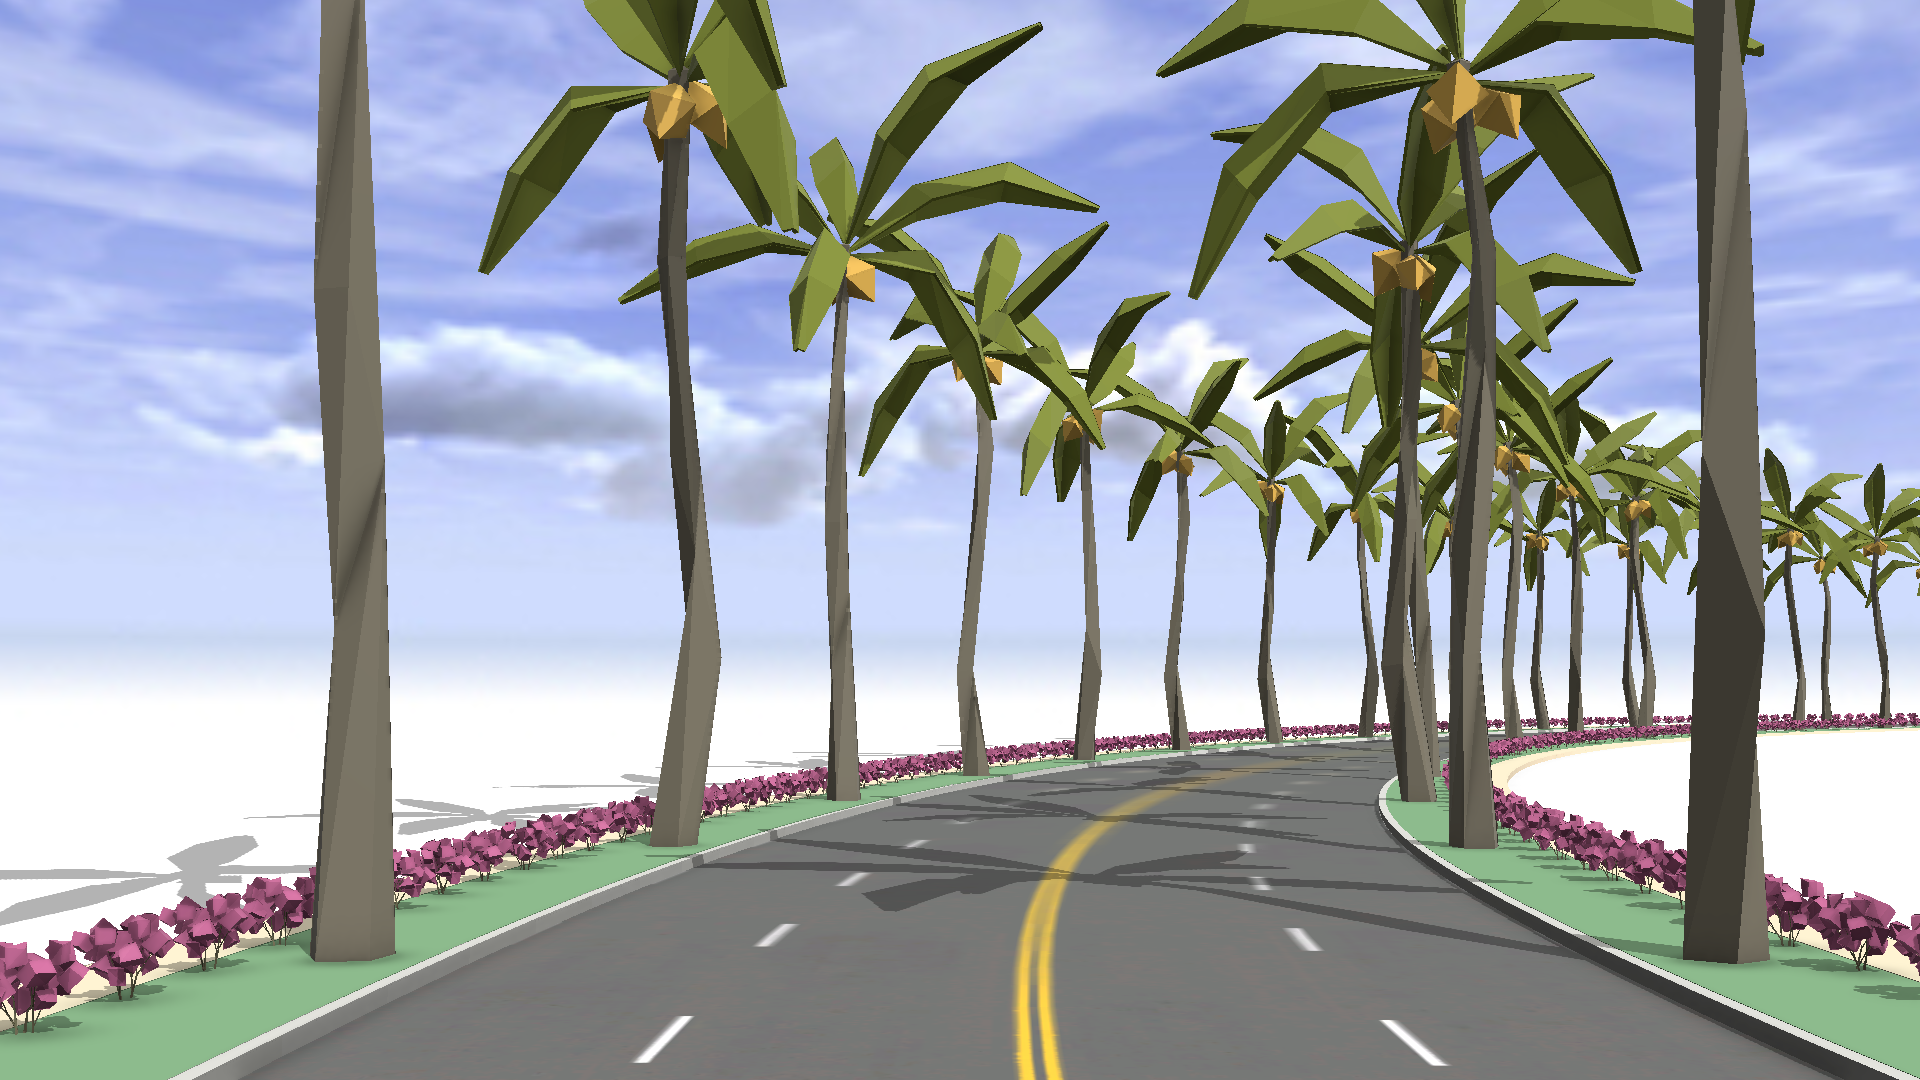 Palm trees and bushes along the side of a road